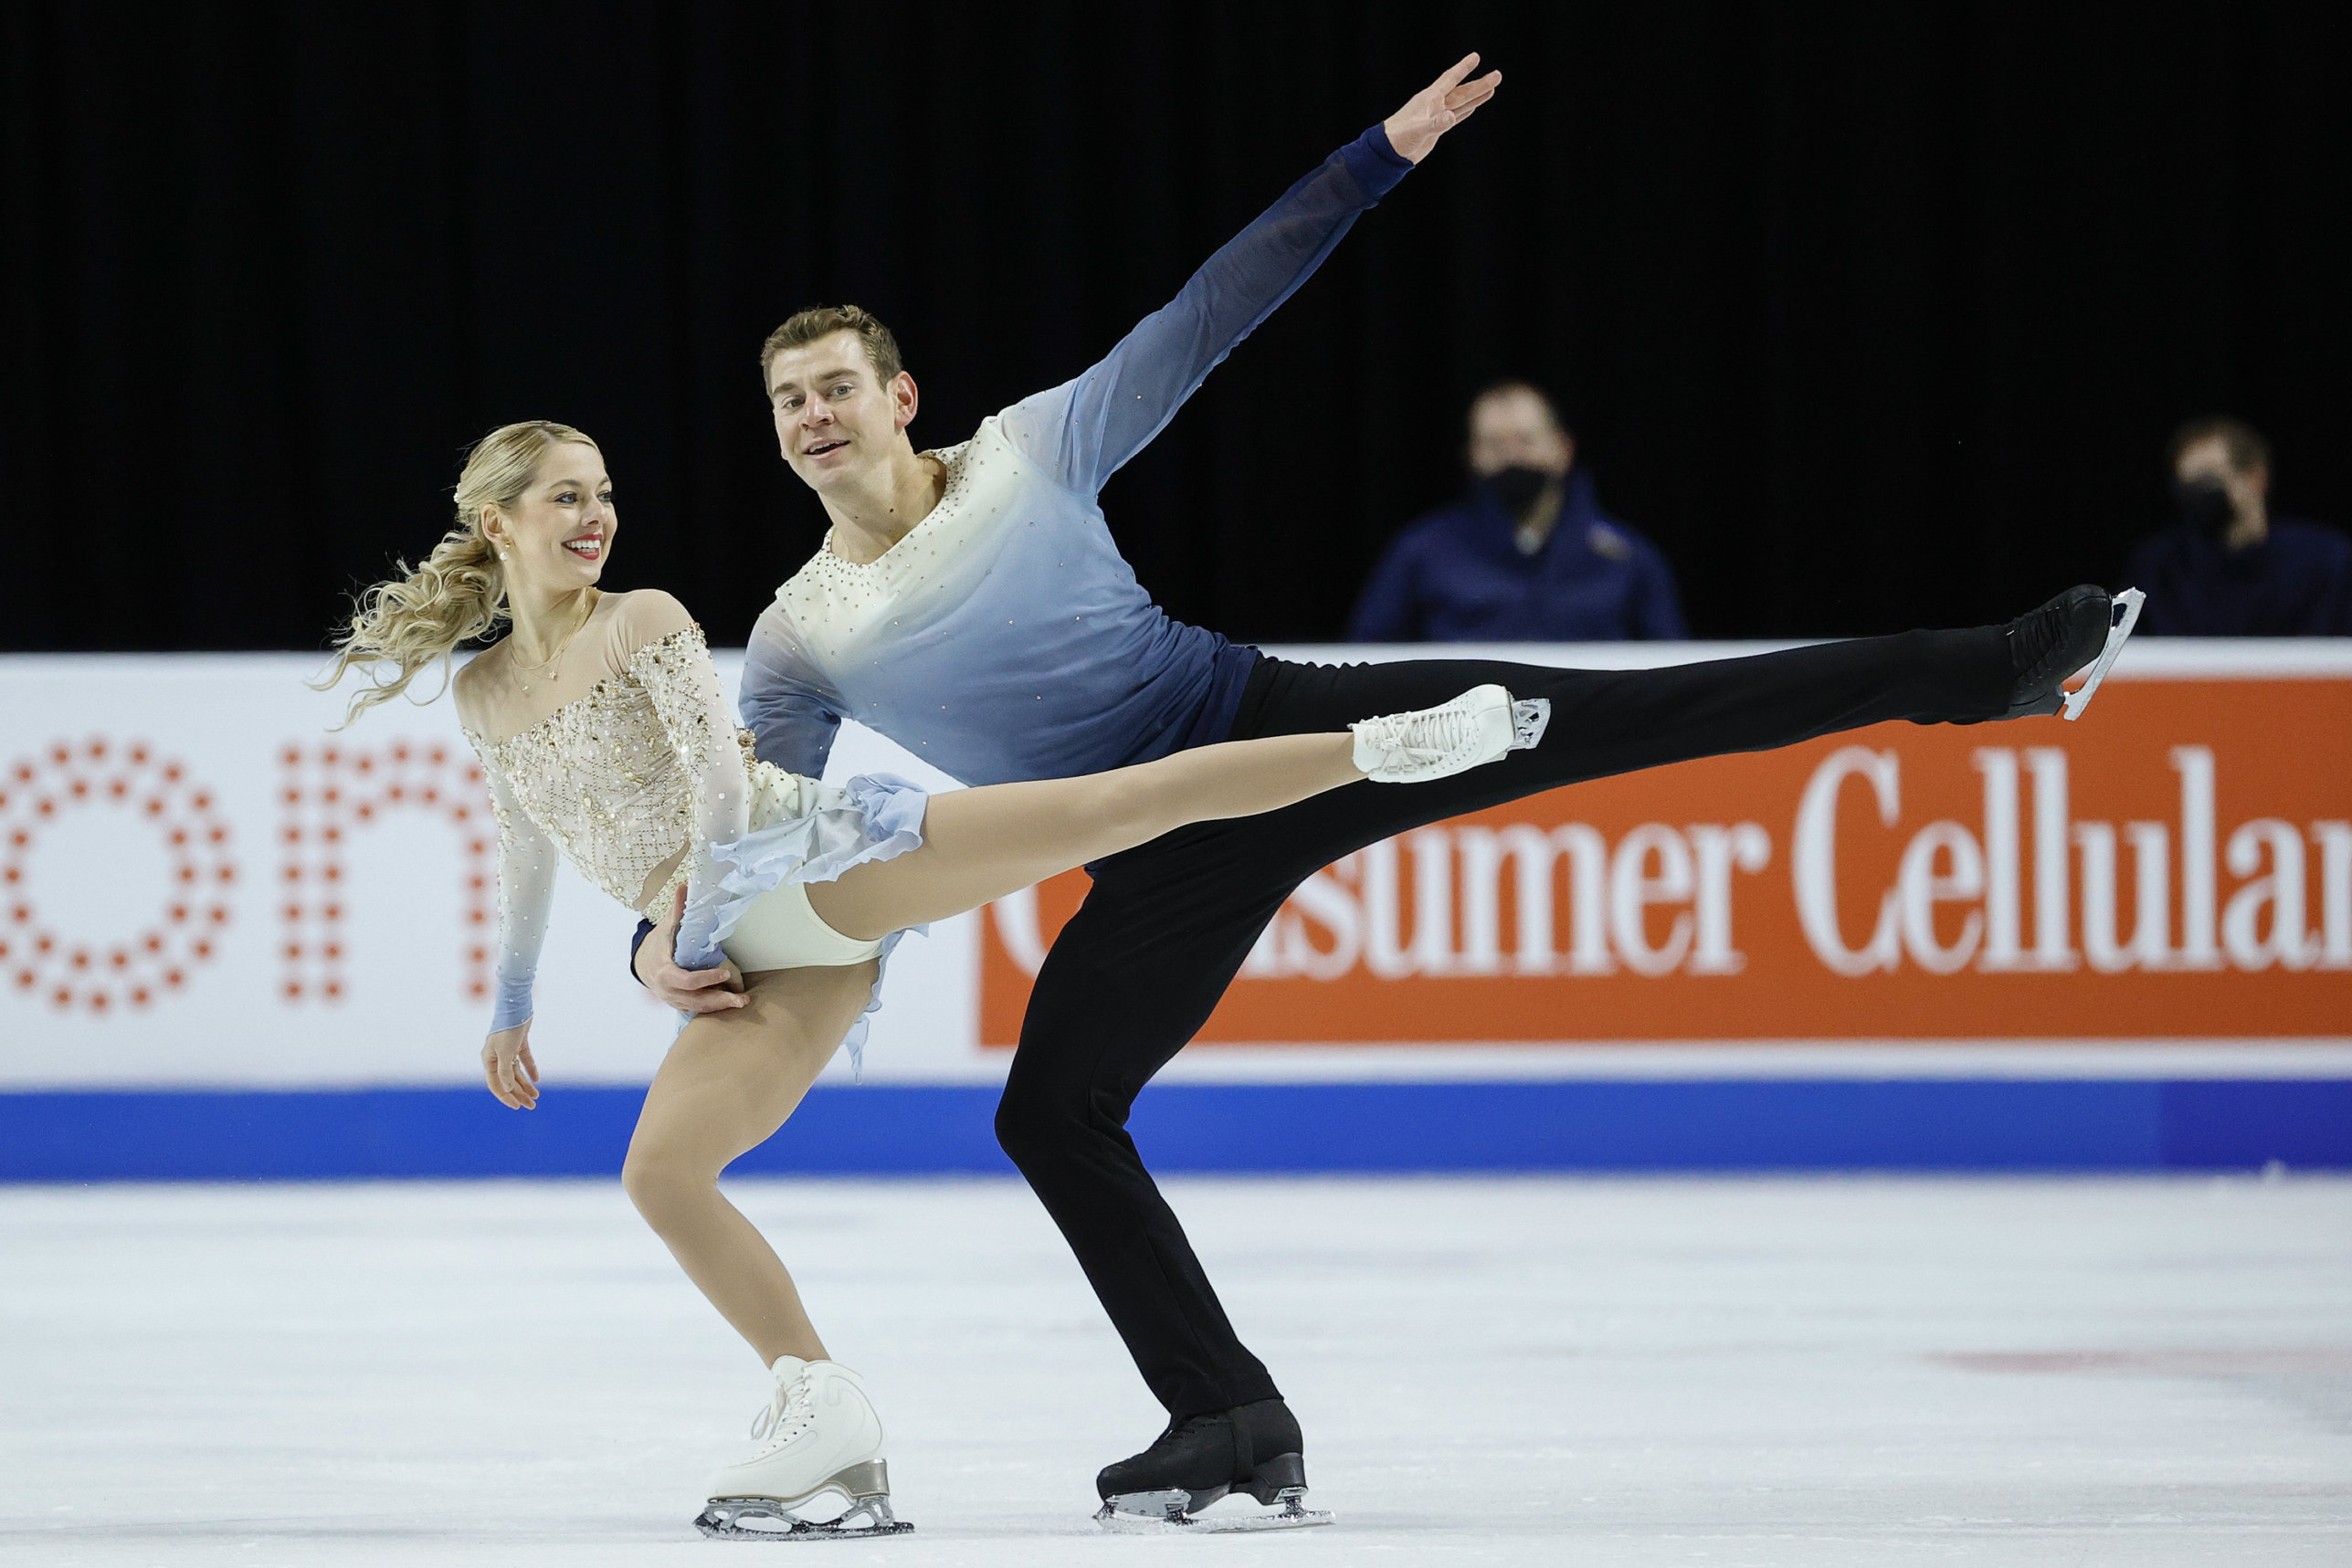 Olympic Skating Stars Come to PA April 28 & 29 for Stars on Ice